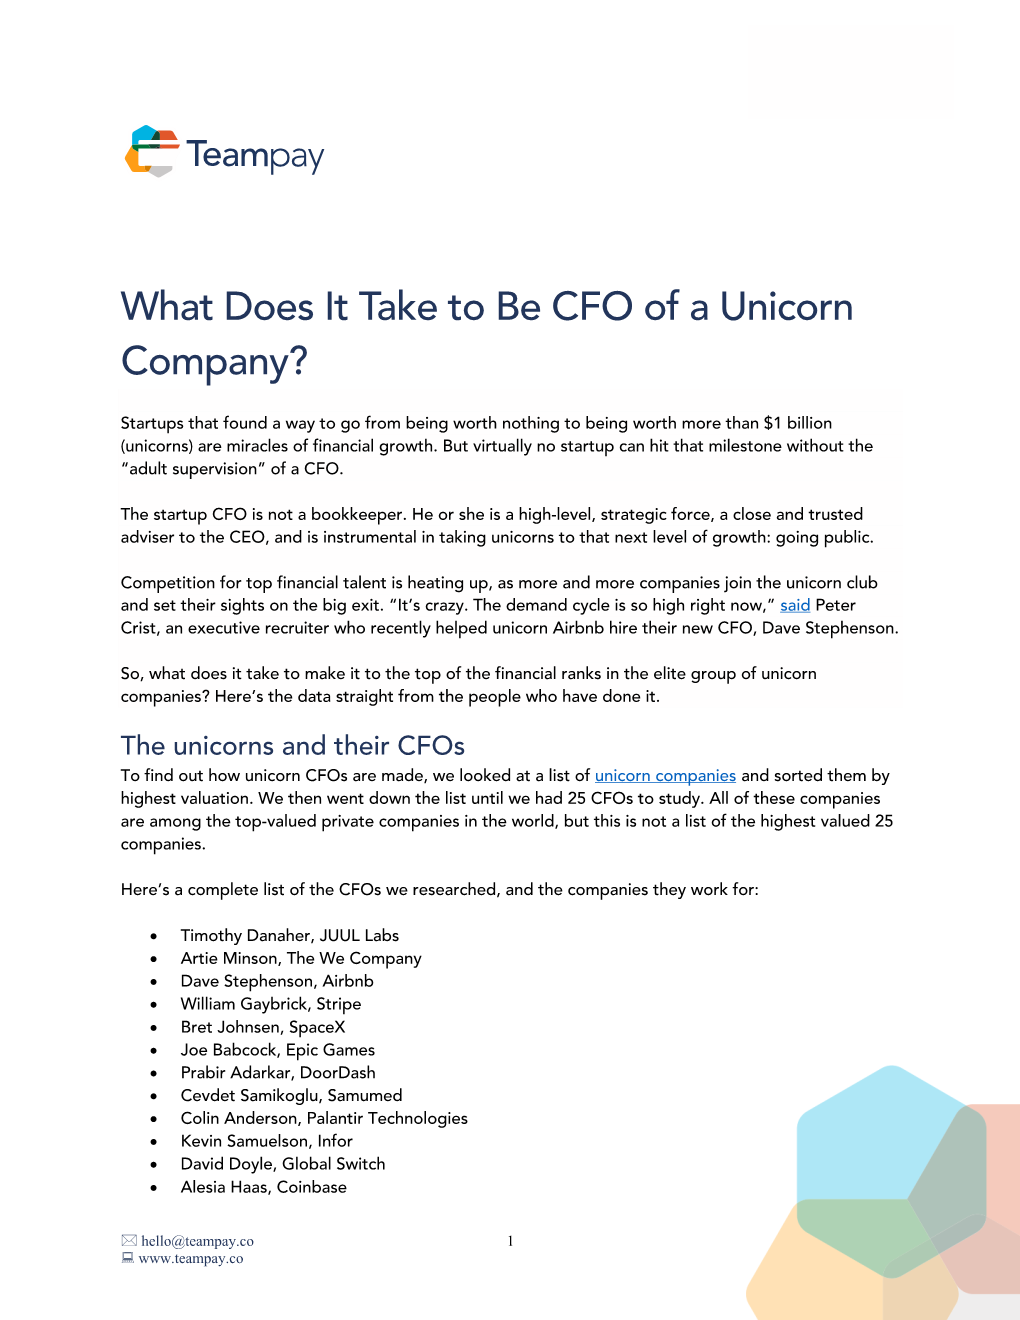 What Does It Take to Be CFO of a Unicorn Company?